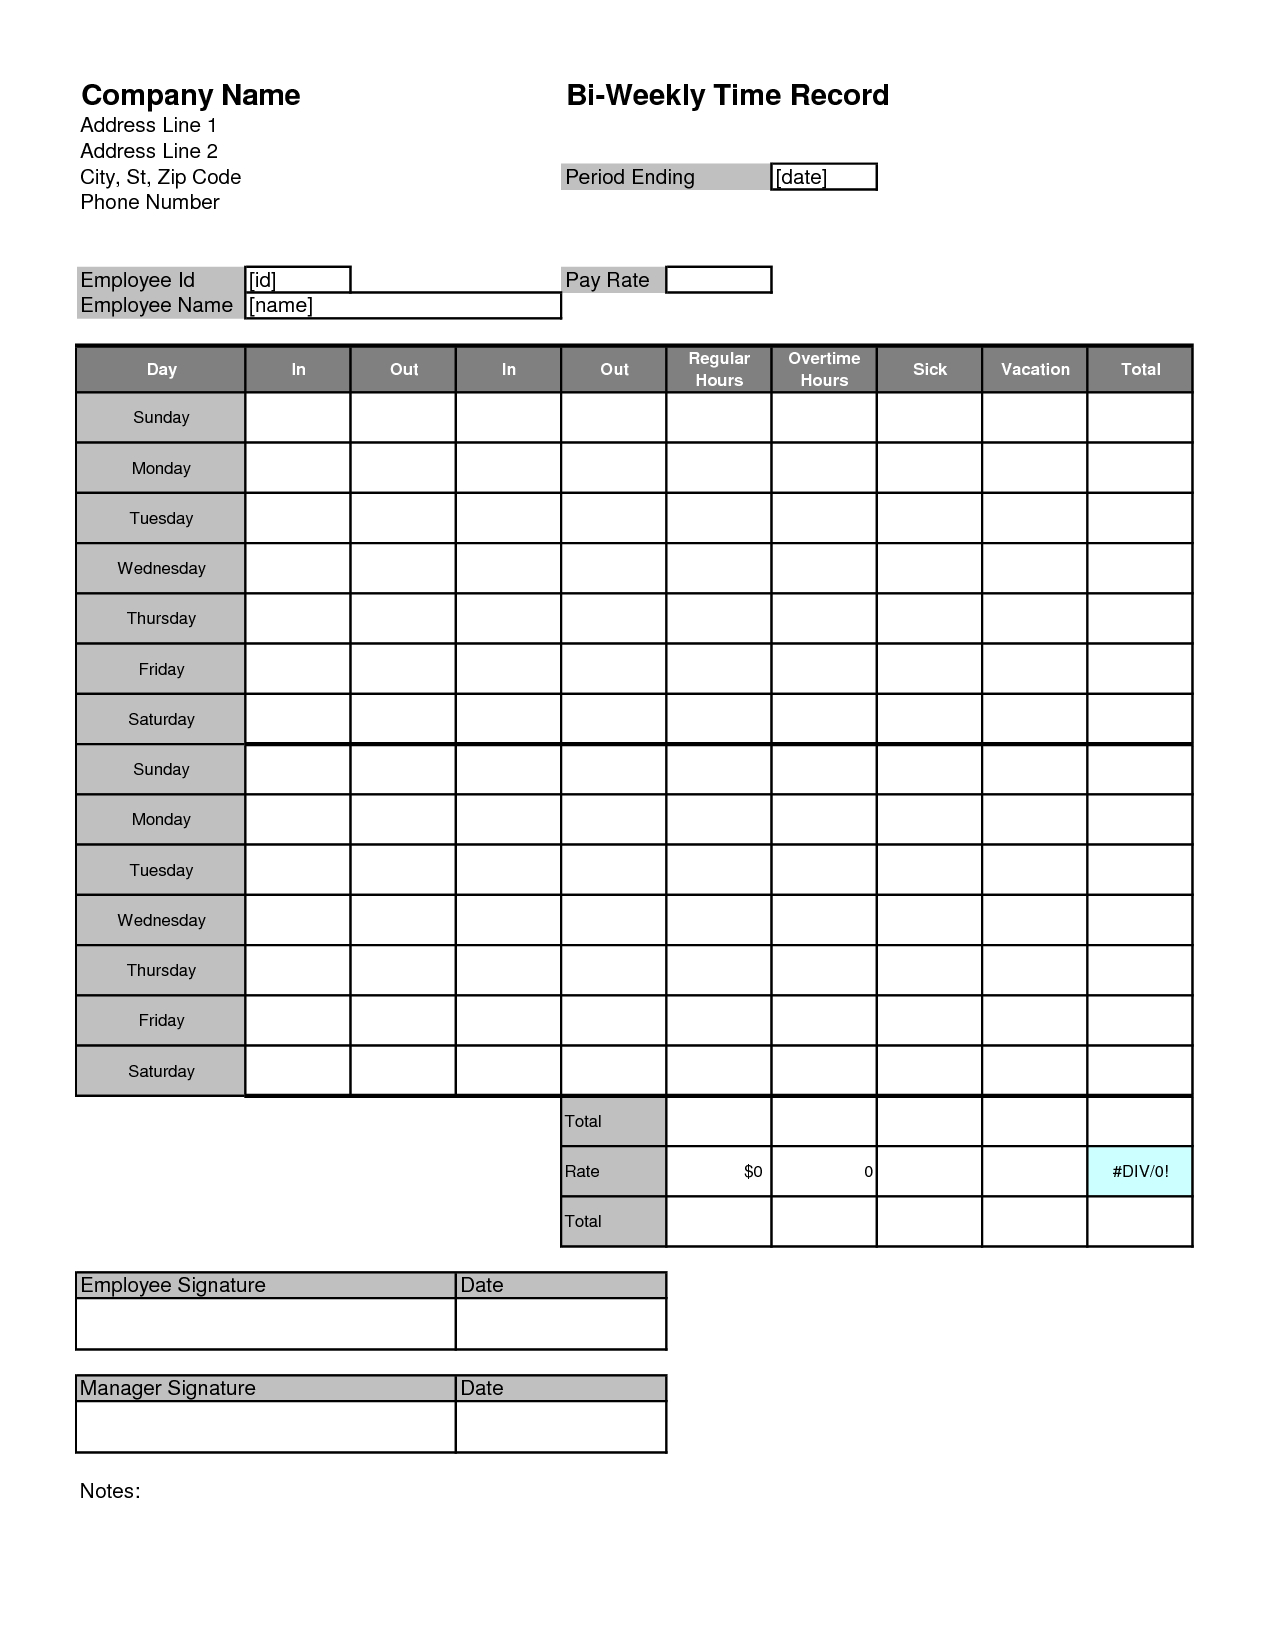 Images For > Time Card Template | Timesheets | Timesheet With Sample Job Cards Templates